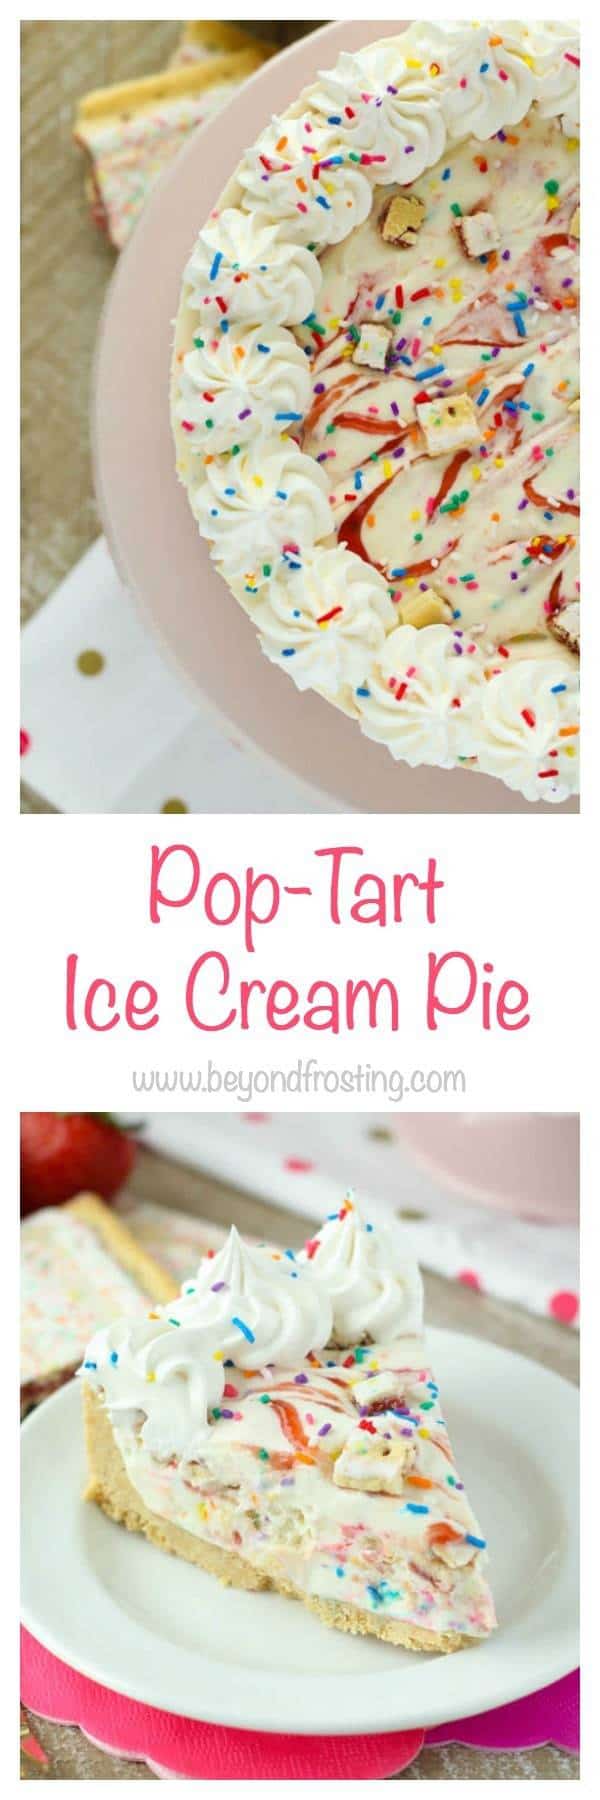  This No-Bake Pop Tart Ice Cream Pie is a childhood dream come true. The no-churn vanilla ice cream is swirled with raspberry jam and Strawberry Pop Tarts. Plus there’s plenty of sprinkles! This frozen pie is perfect all summer long.